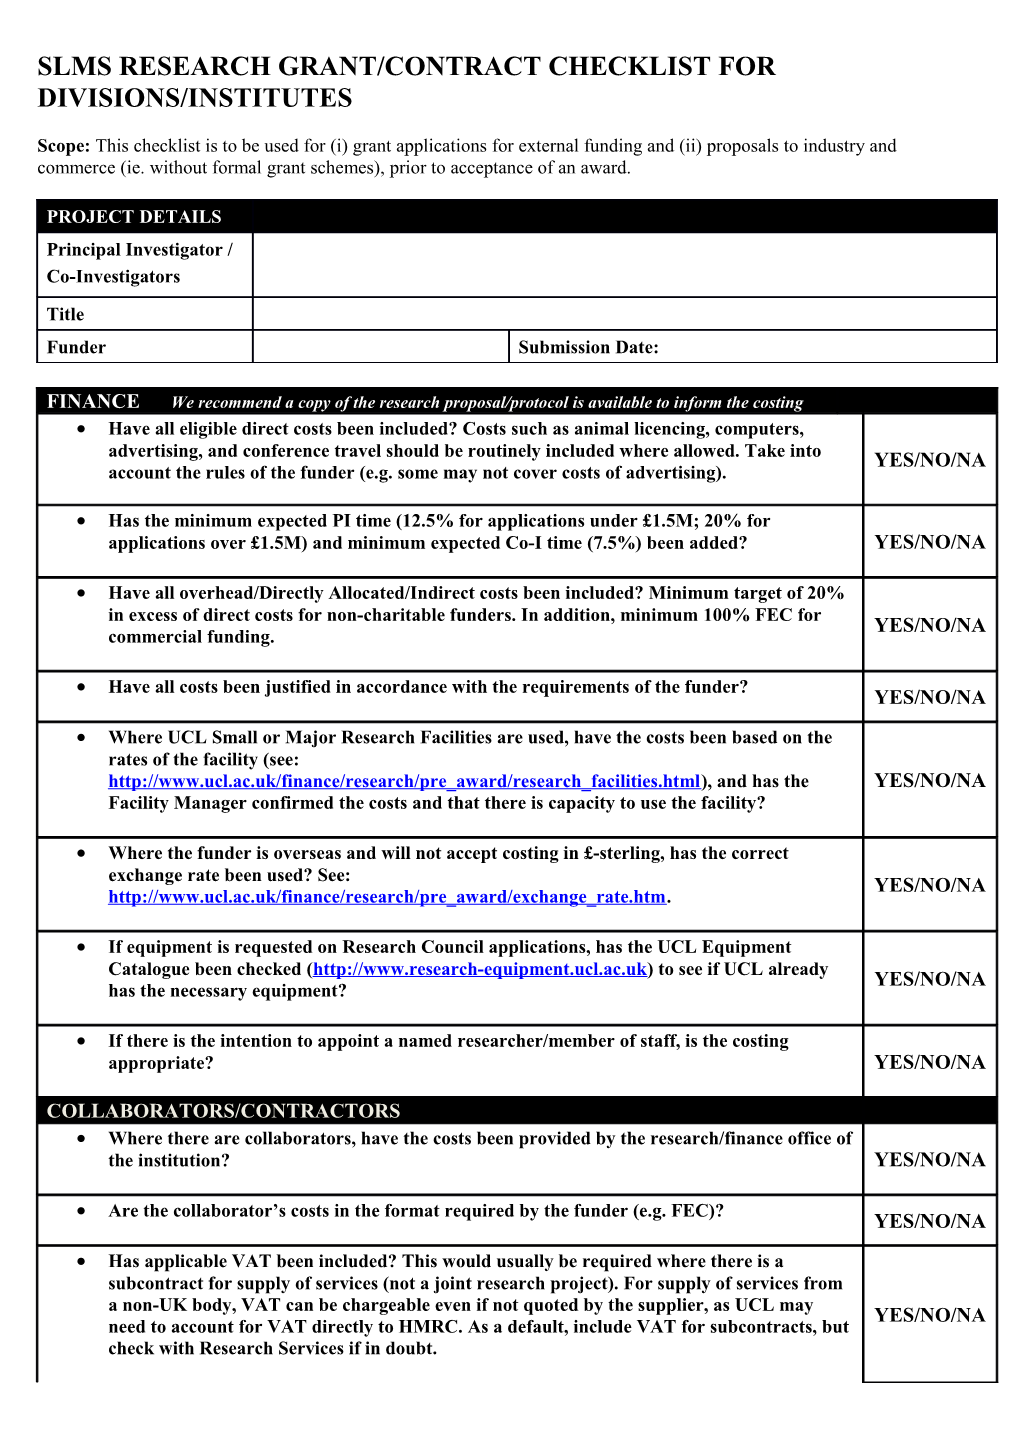 Slms Research Grant/Contract Checklist for Divisions/Institutes